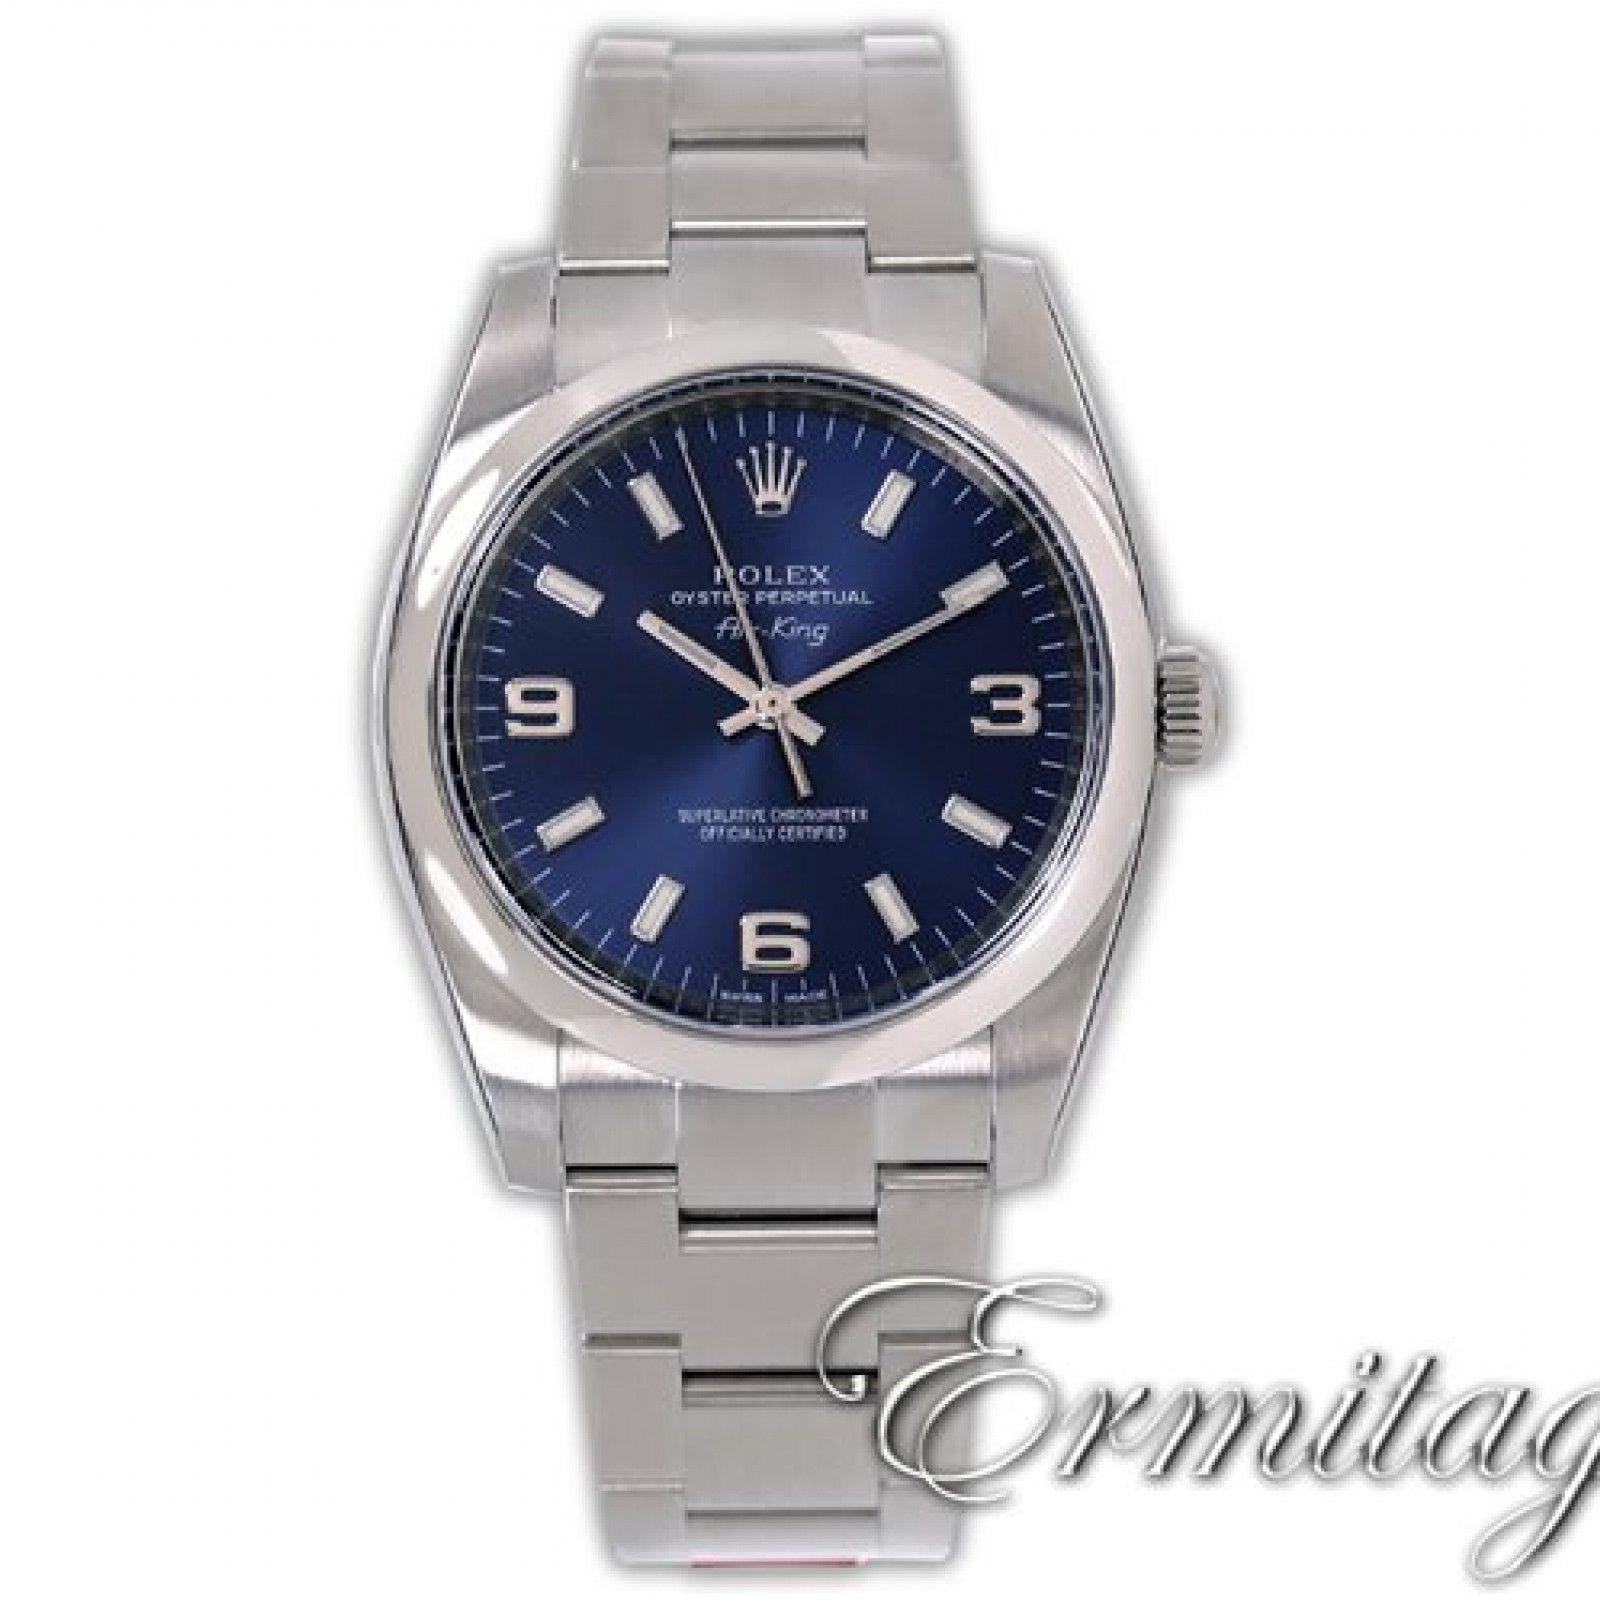 Rolex Air King 114200 Stainless Steel Year 2014